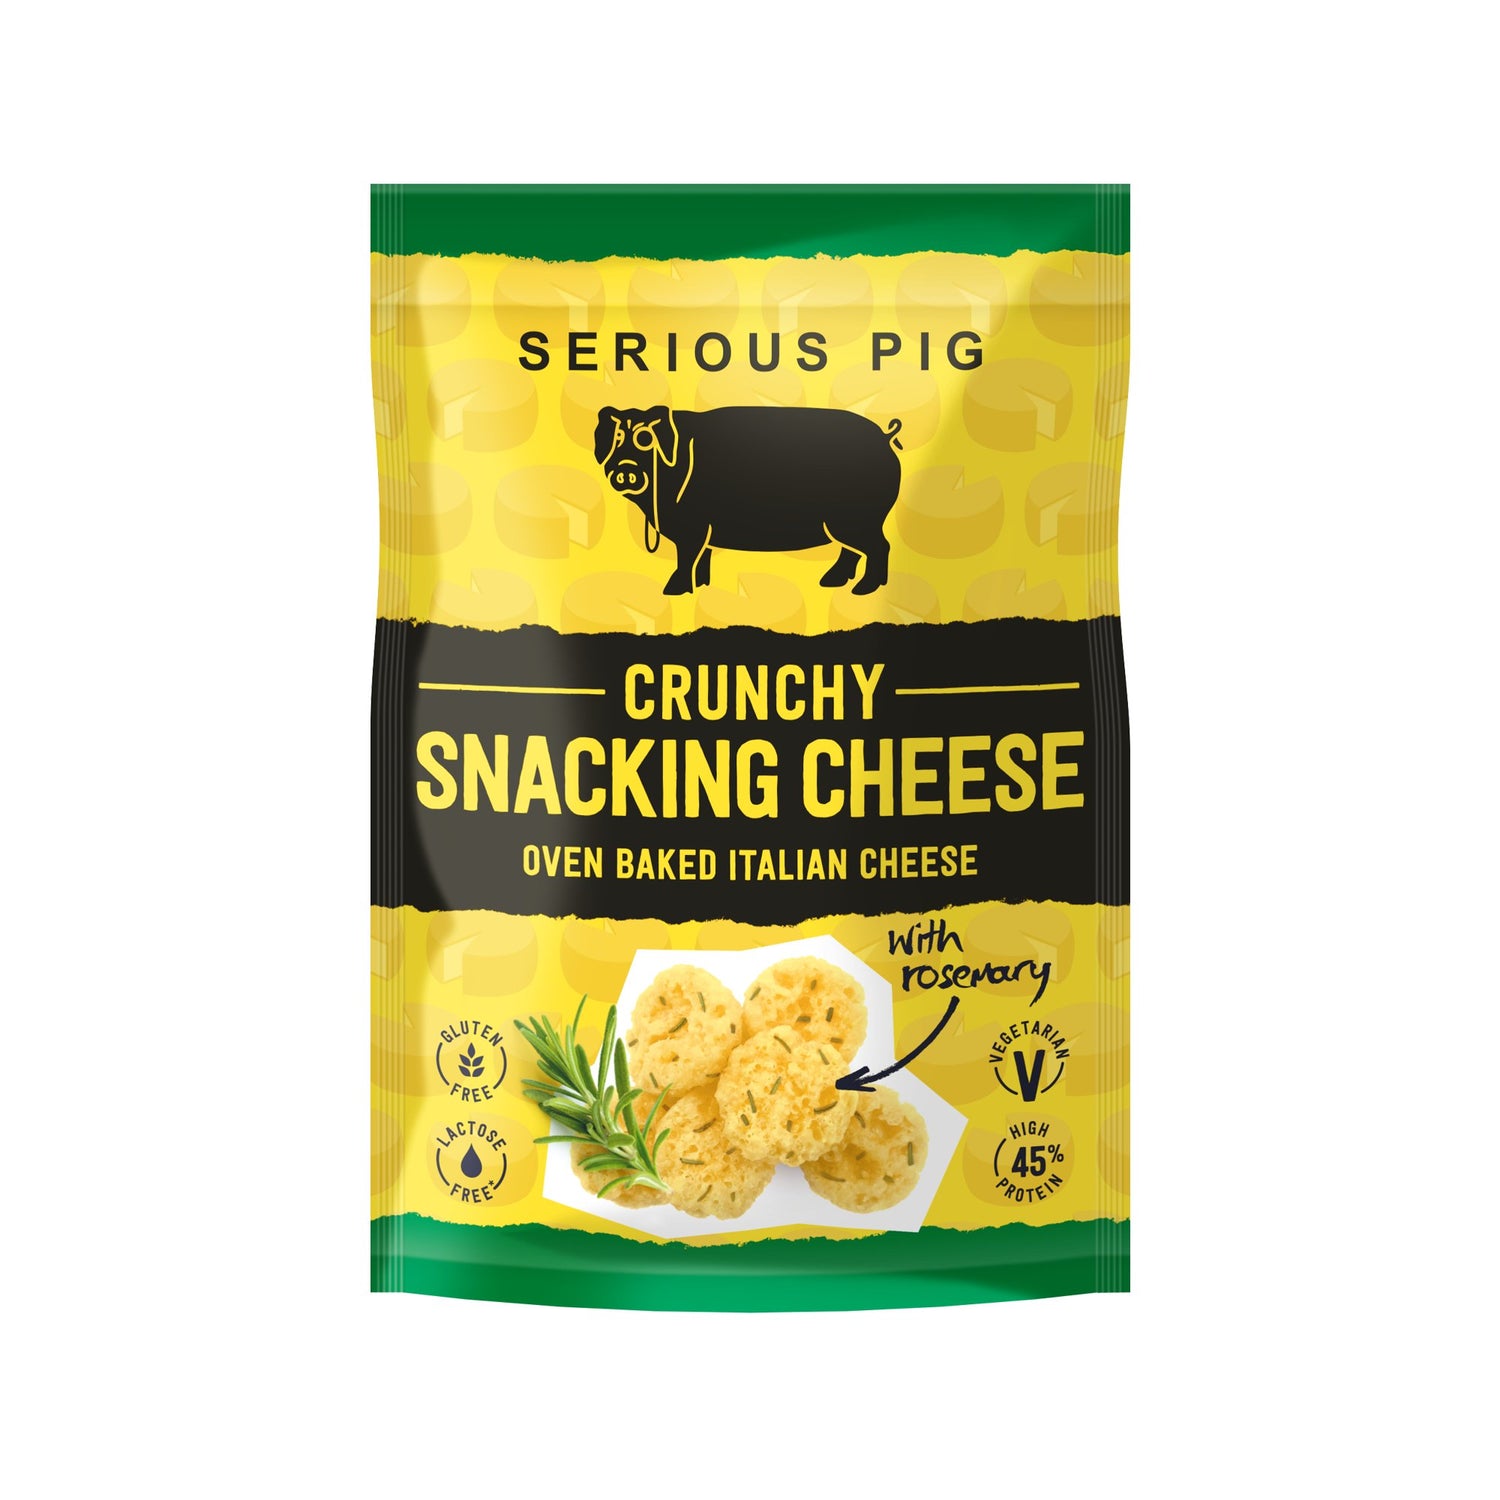 Serious Pig Crunchy Snacking Cheese x 4 flavours - Keto friendly - theskinnyfoodco